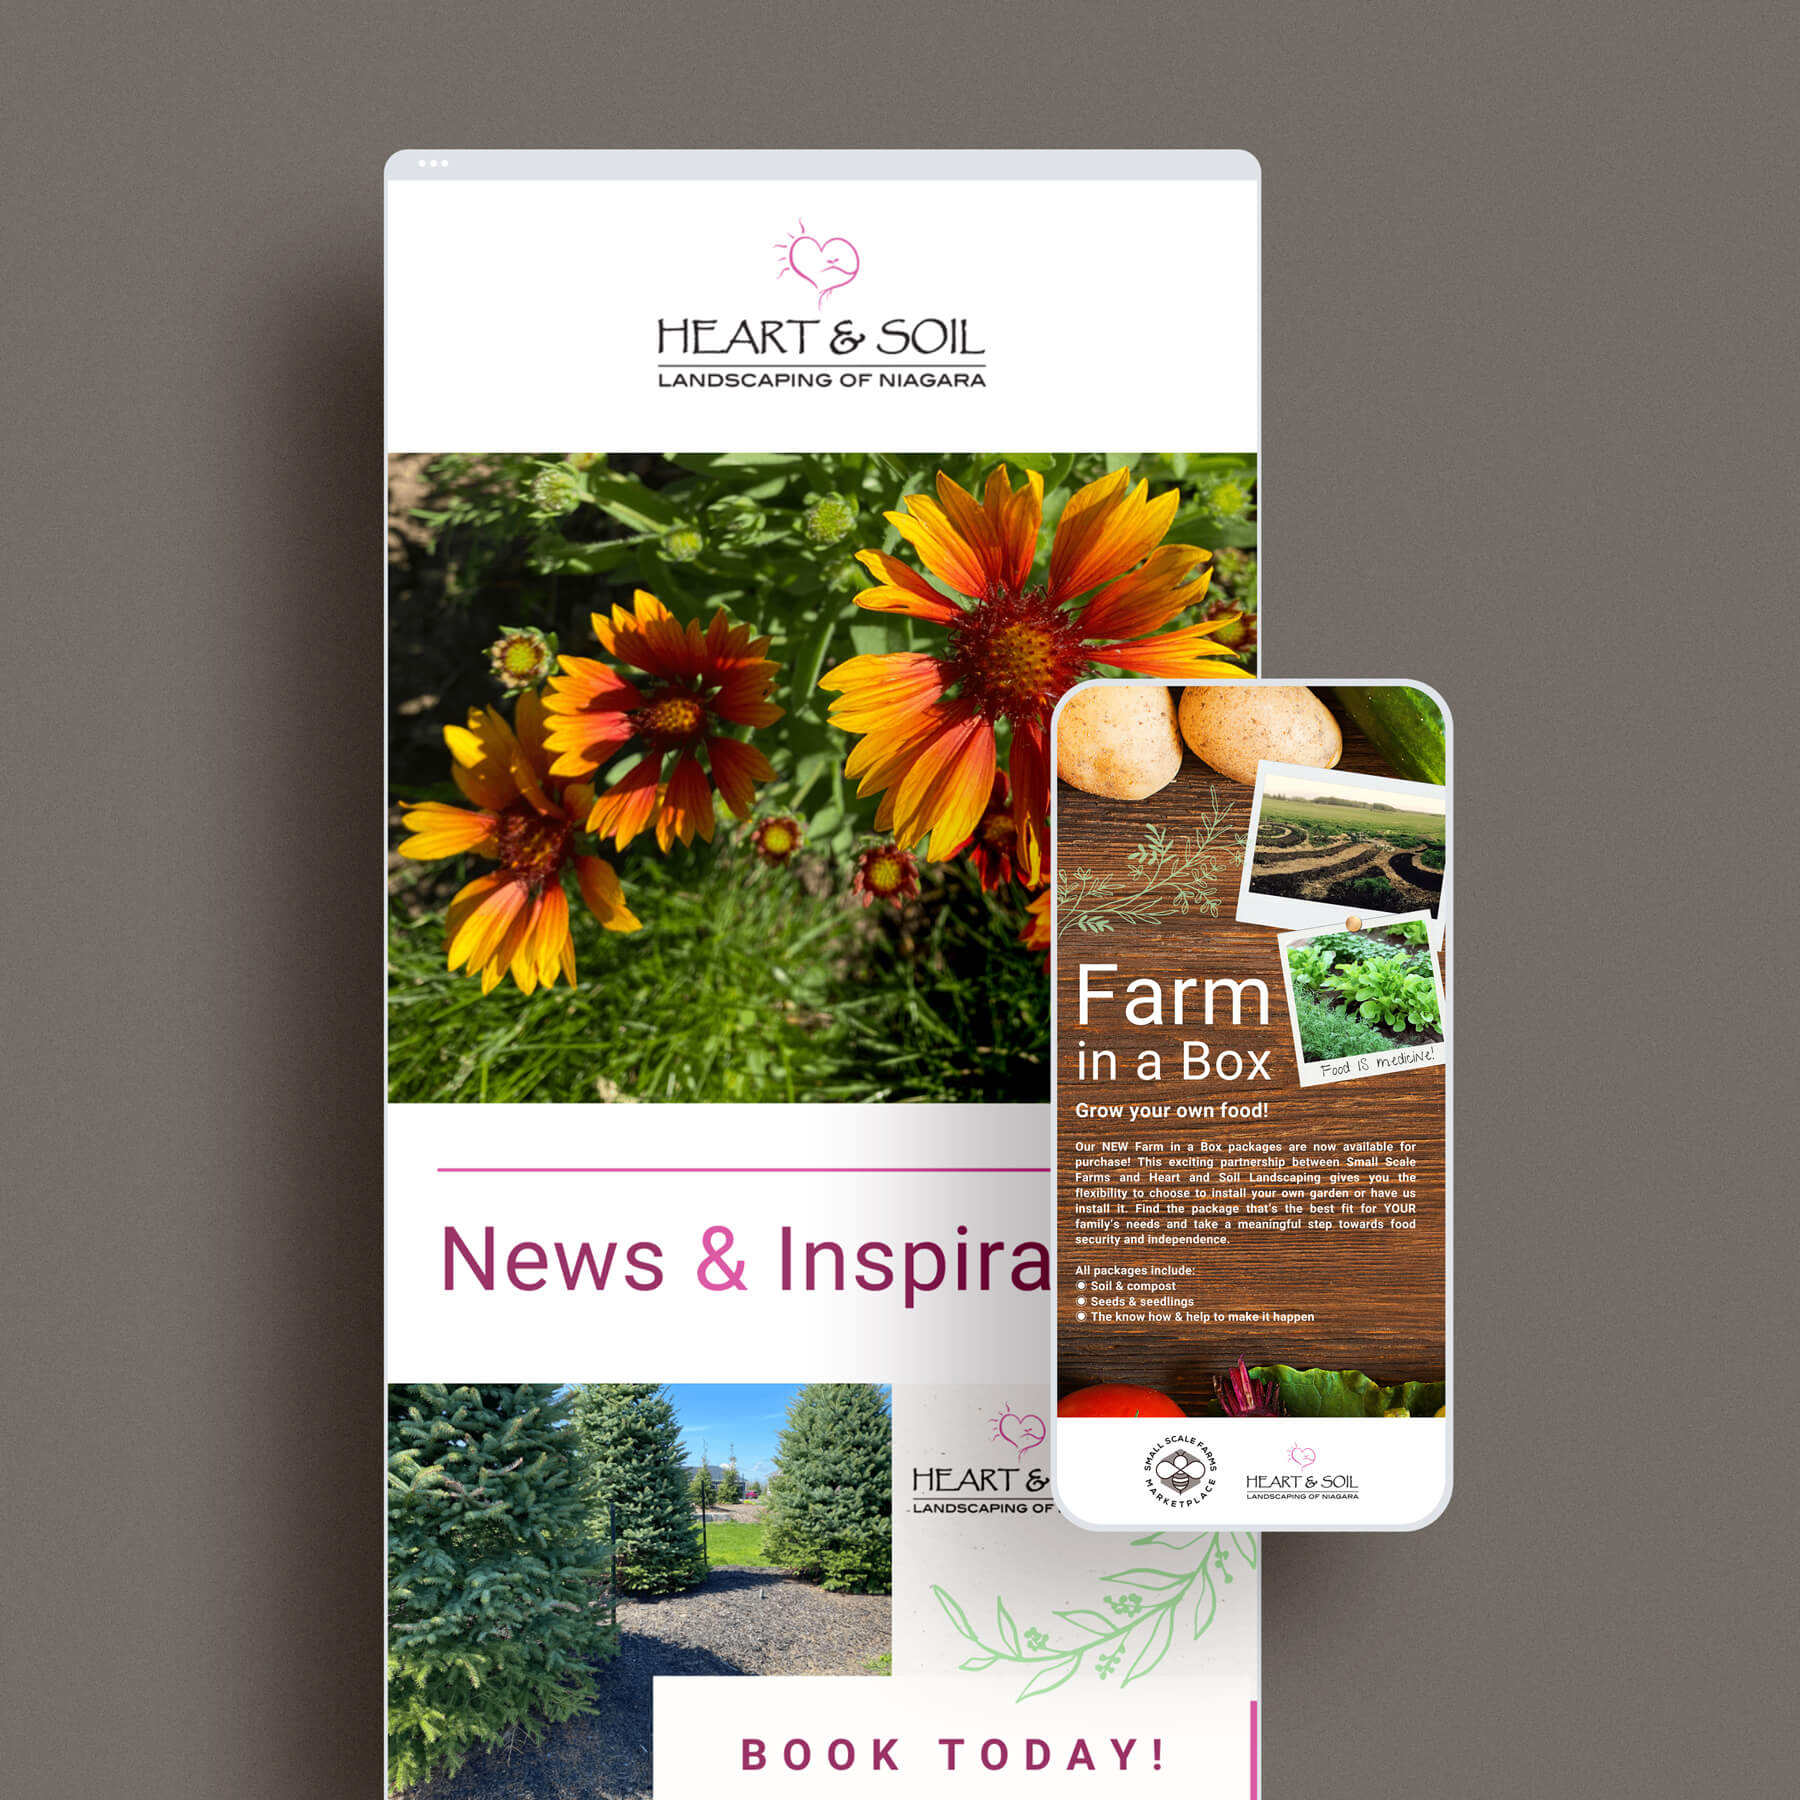 Digital Marketing for Heart and Soil Landscaping of Niagara designed by Tulip Tree Creative